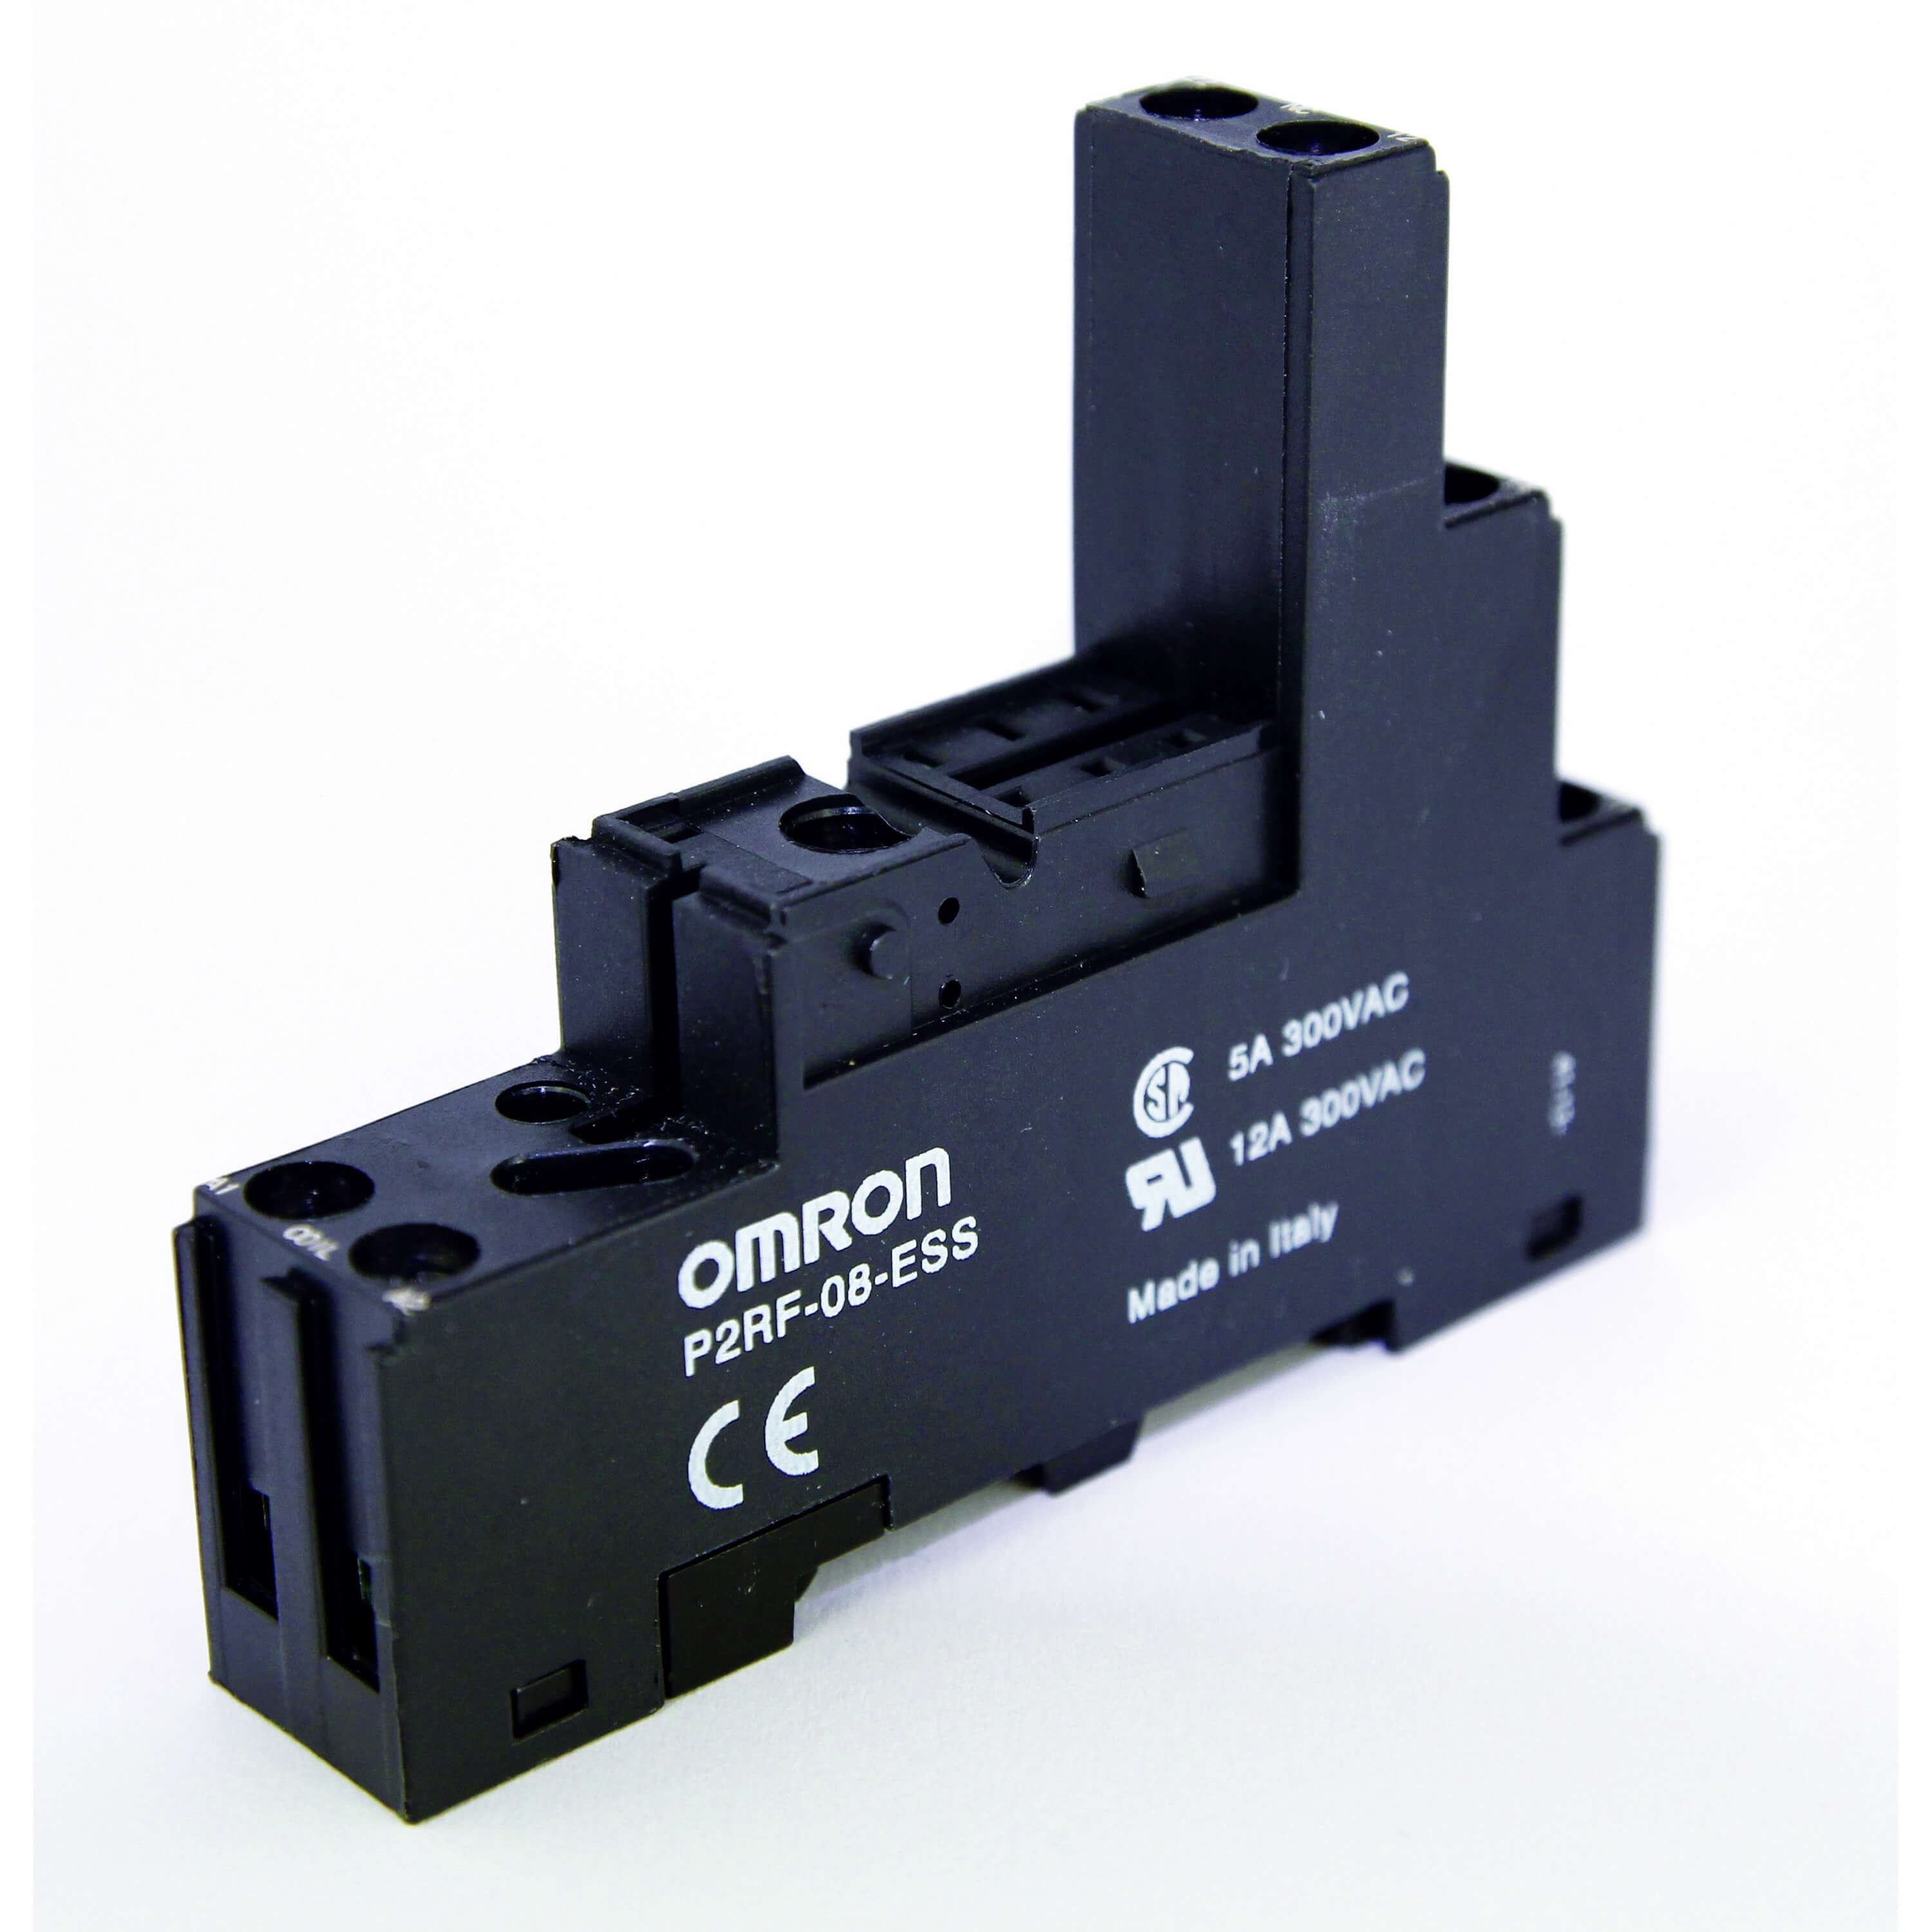 Details about  / P2RF-08-E P2RF08E Omron Connecting Socket 1PCS NEW Quality Assurance 3months